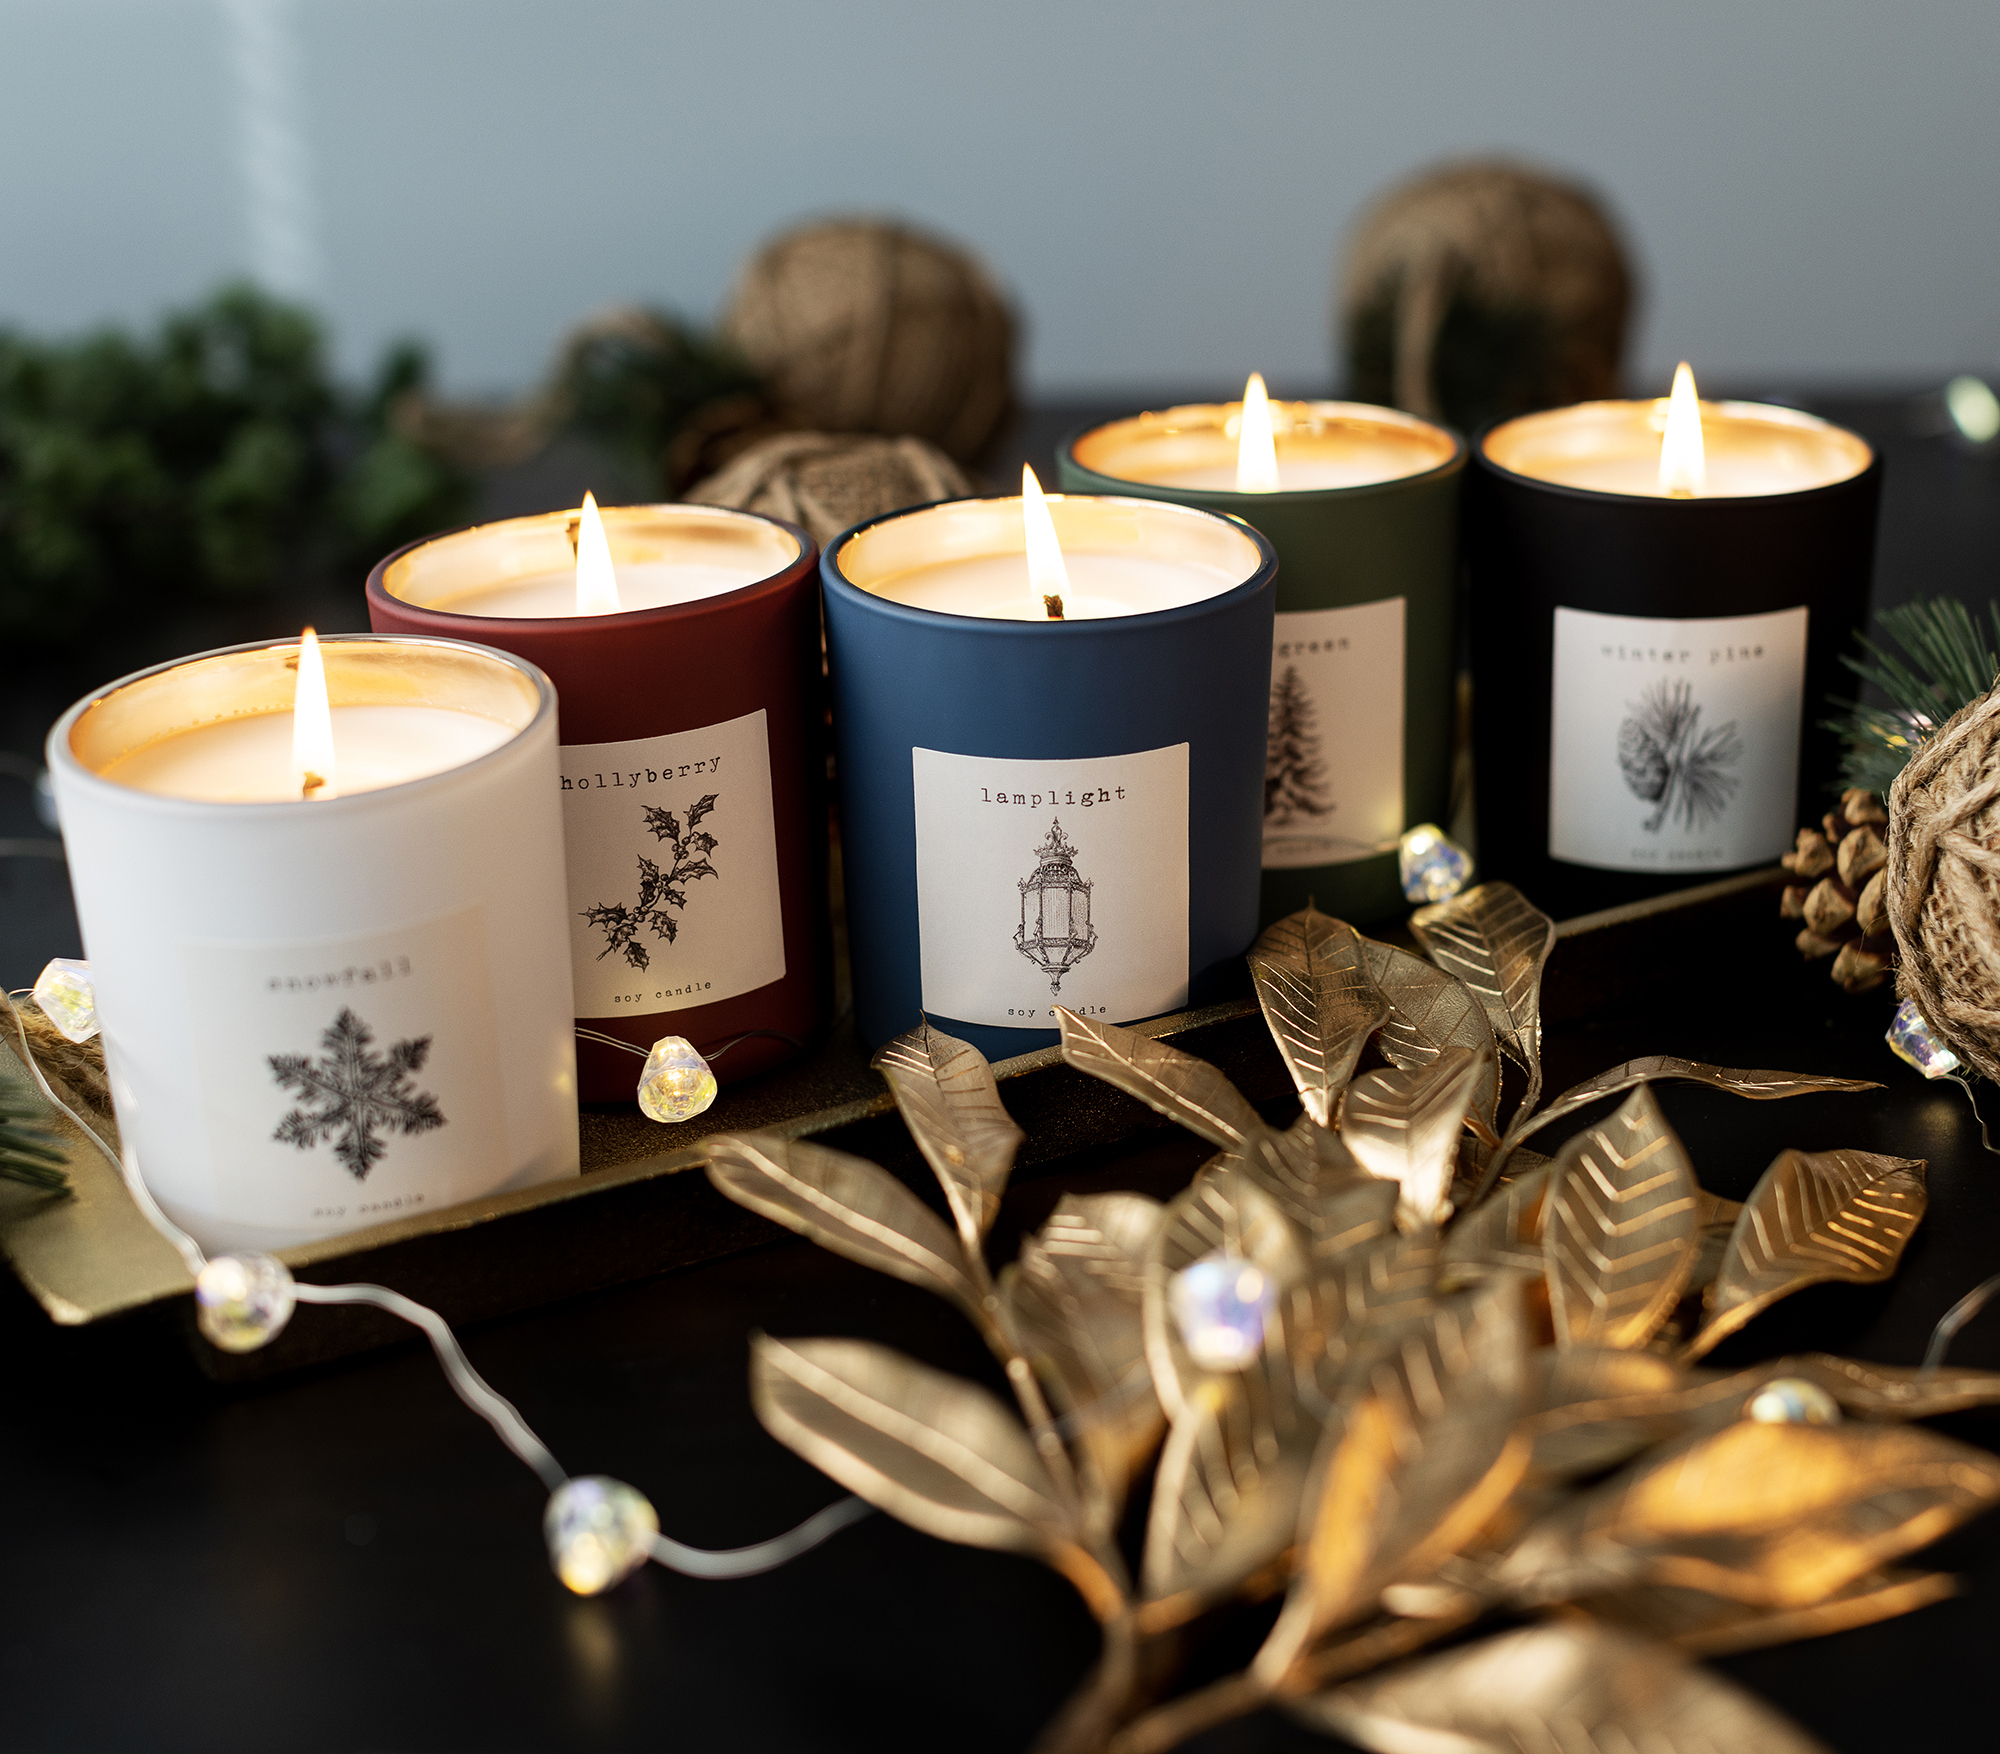 Astra tumbler jar candles lit with holiday inspired labels.